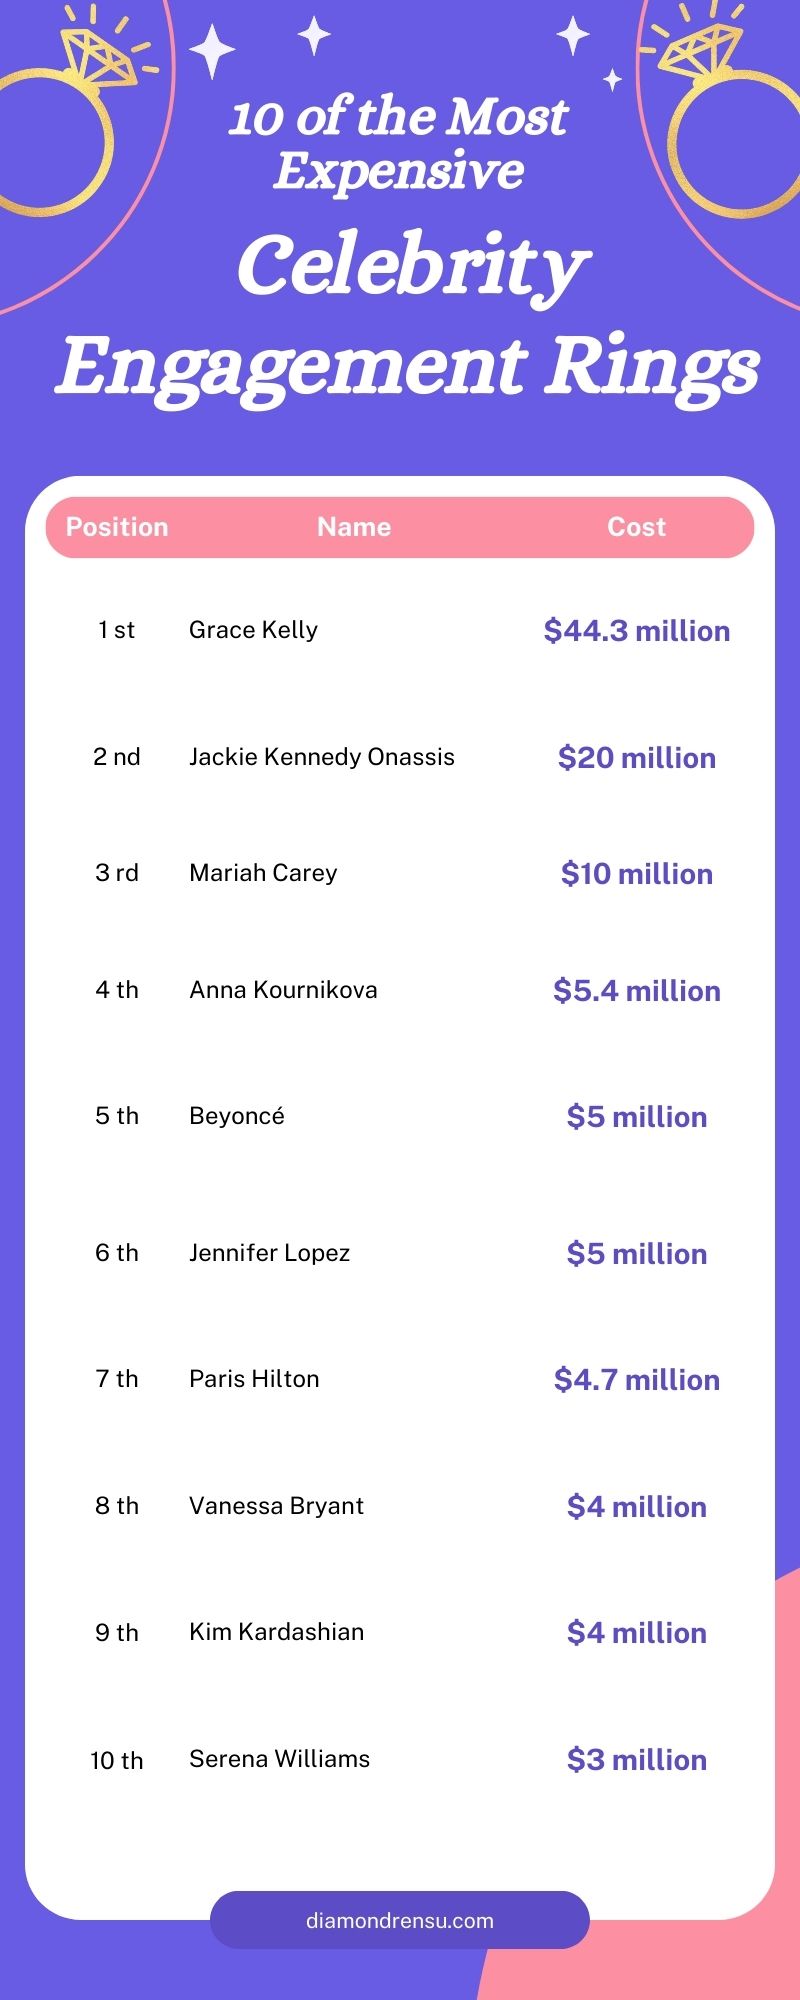 10_of_the_Most_Expensive_Celebrity_Engagement_Rings_Infographic